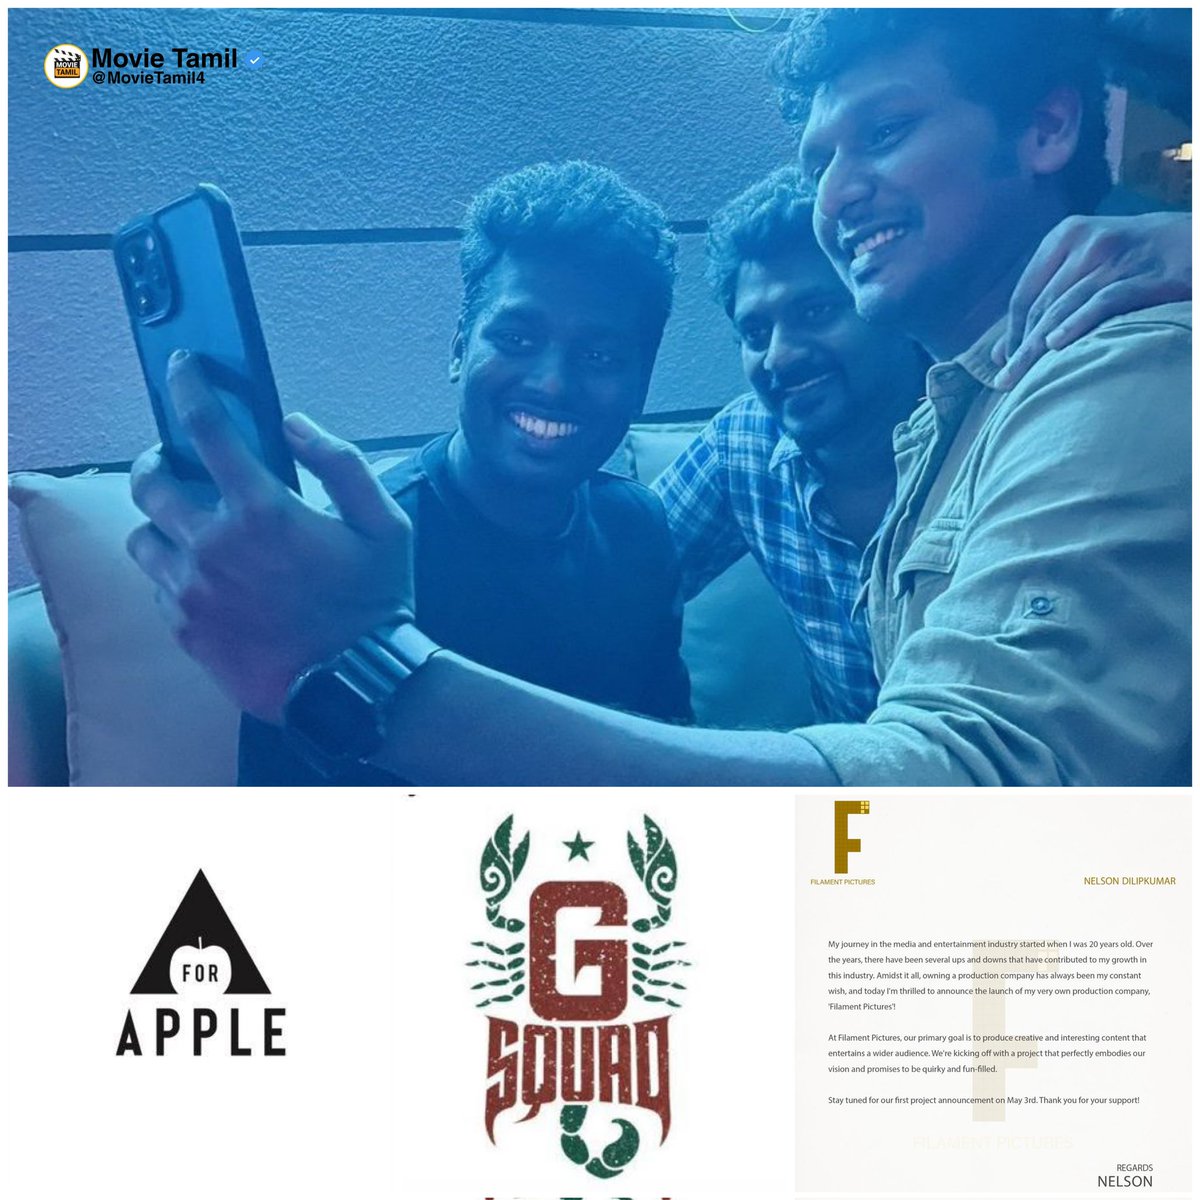 The three directors who directed subsequent films with Thalapathy Vijay later formed a production company

#Atlee - A For Apple
#LokeshKanagaraj - G Squad
#Nelson - Filament Pictures

#ThalapathyVijay #Thalapathy69 #Jailer2 #Coolie